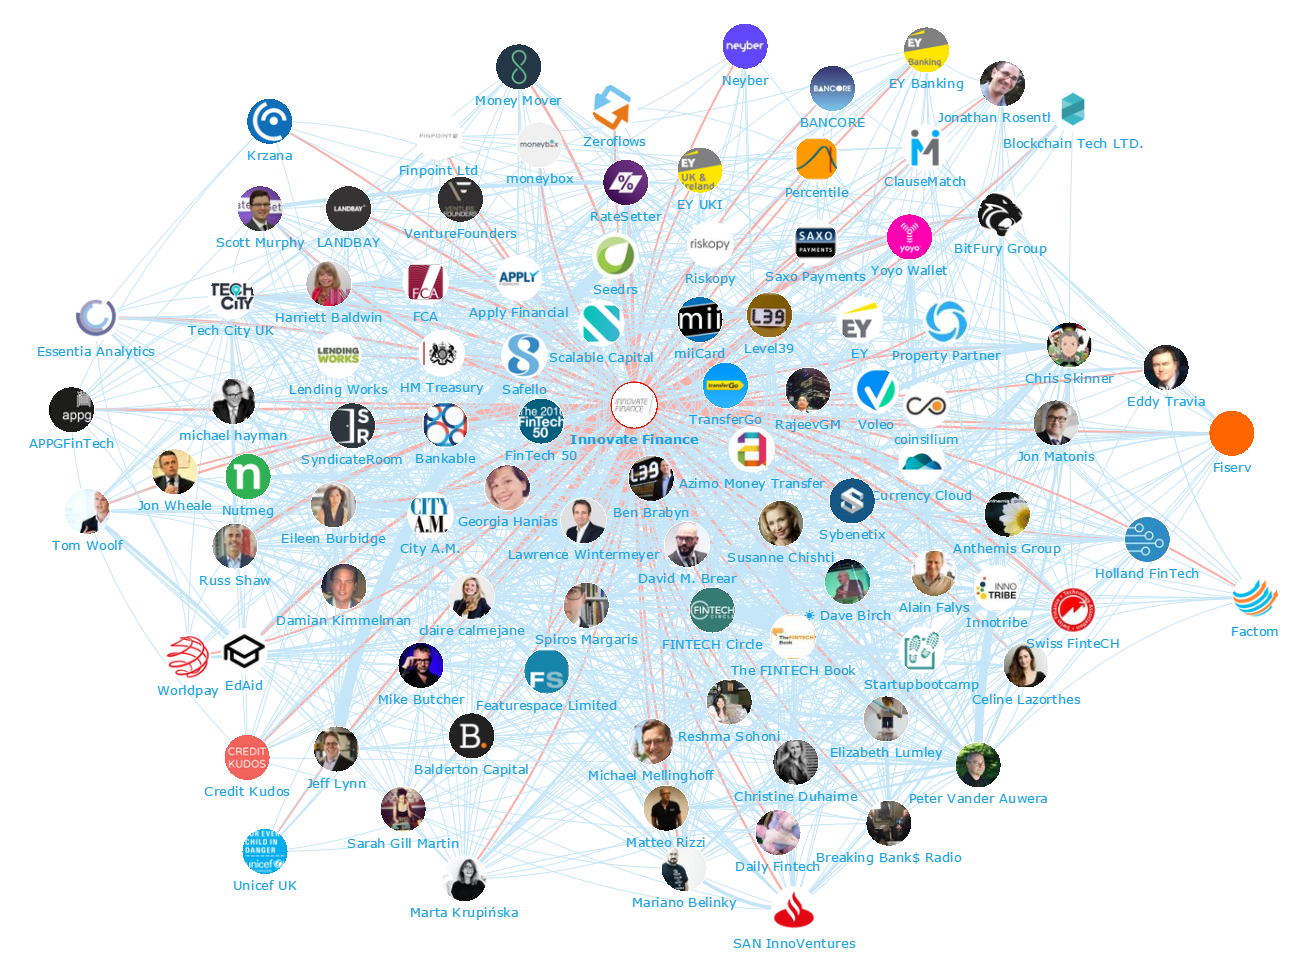 Innovate Finance Global Summit 2016: Top 100 Influencers and Brands